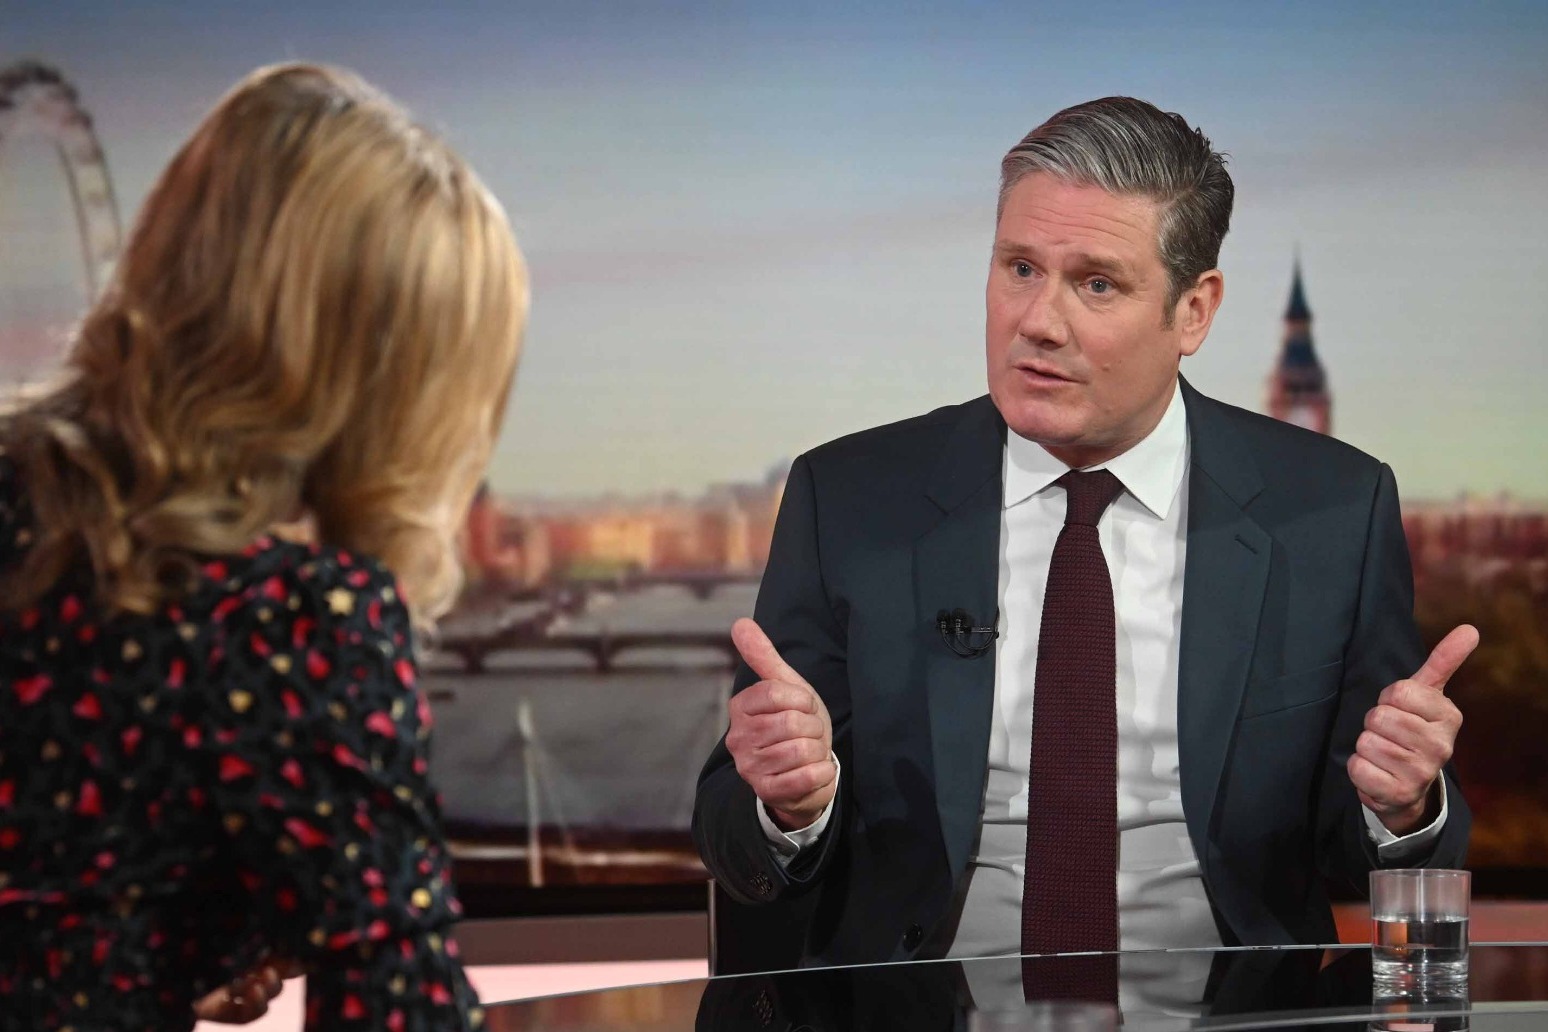 Starmer condemns Westminster’s ‘misogynist’ culture after attack on Rayner 